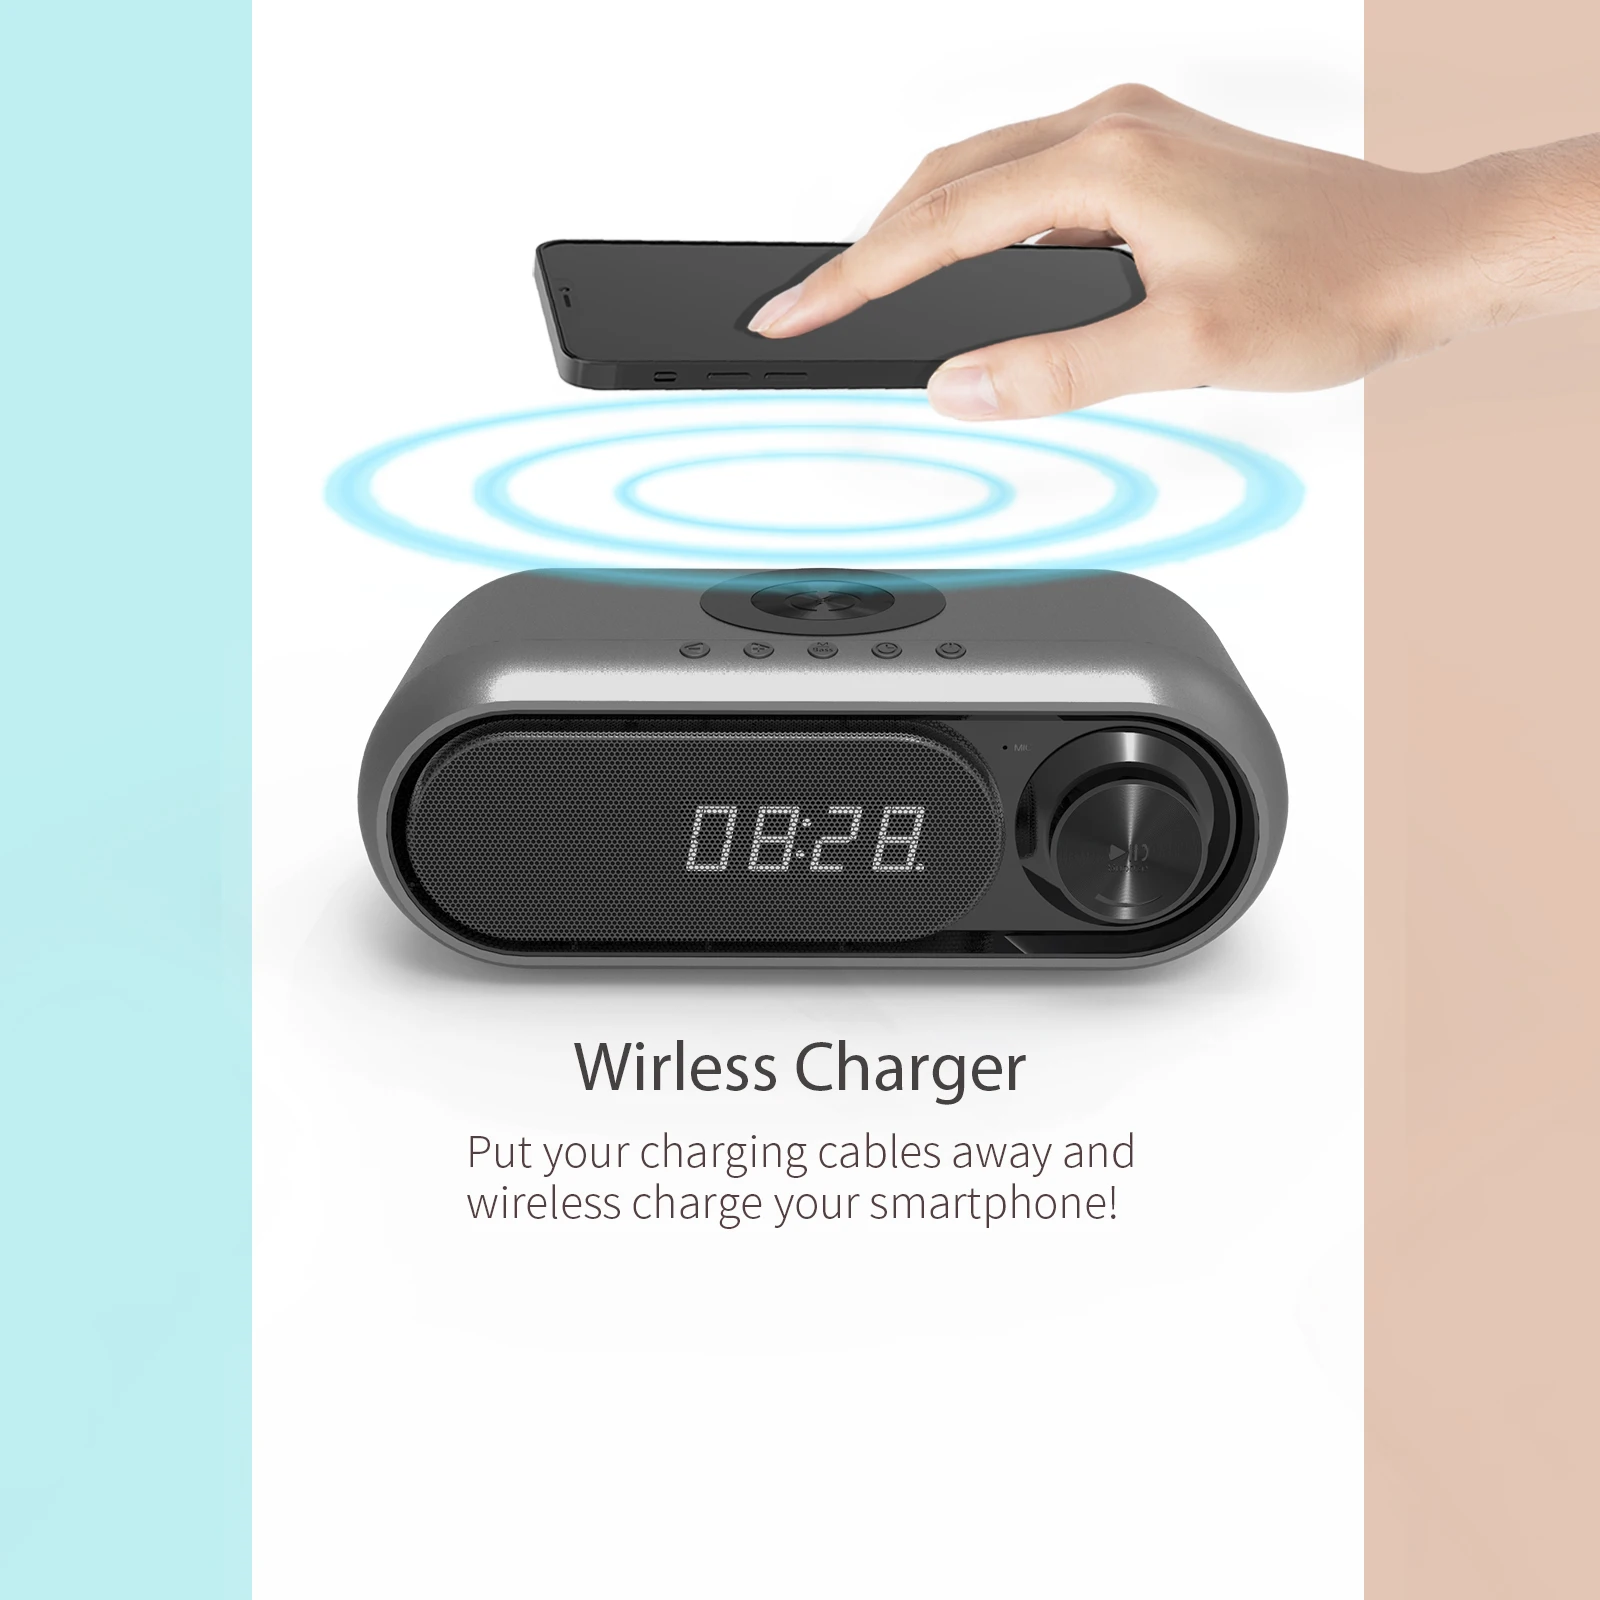 2022 Creativity Fast Wireless Charger3 in 1 For iPhone android Retro wireless charging bluetooth speaker and clock alarm clock